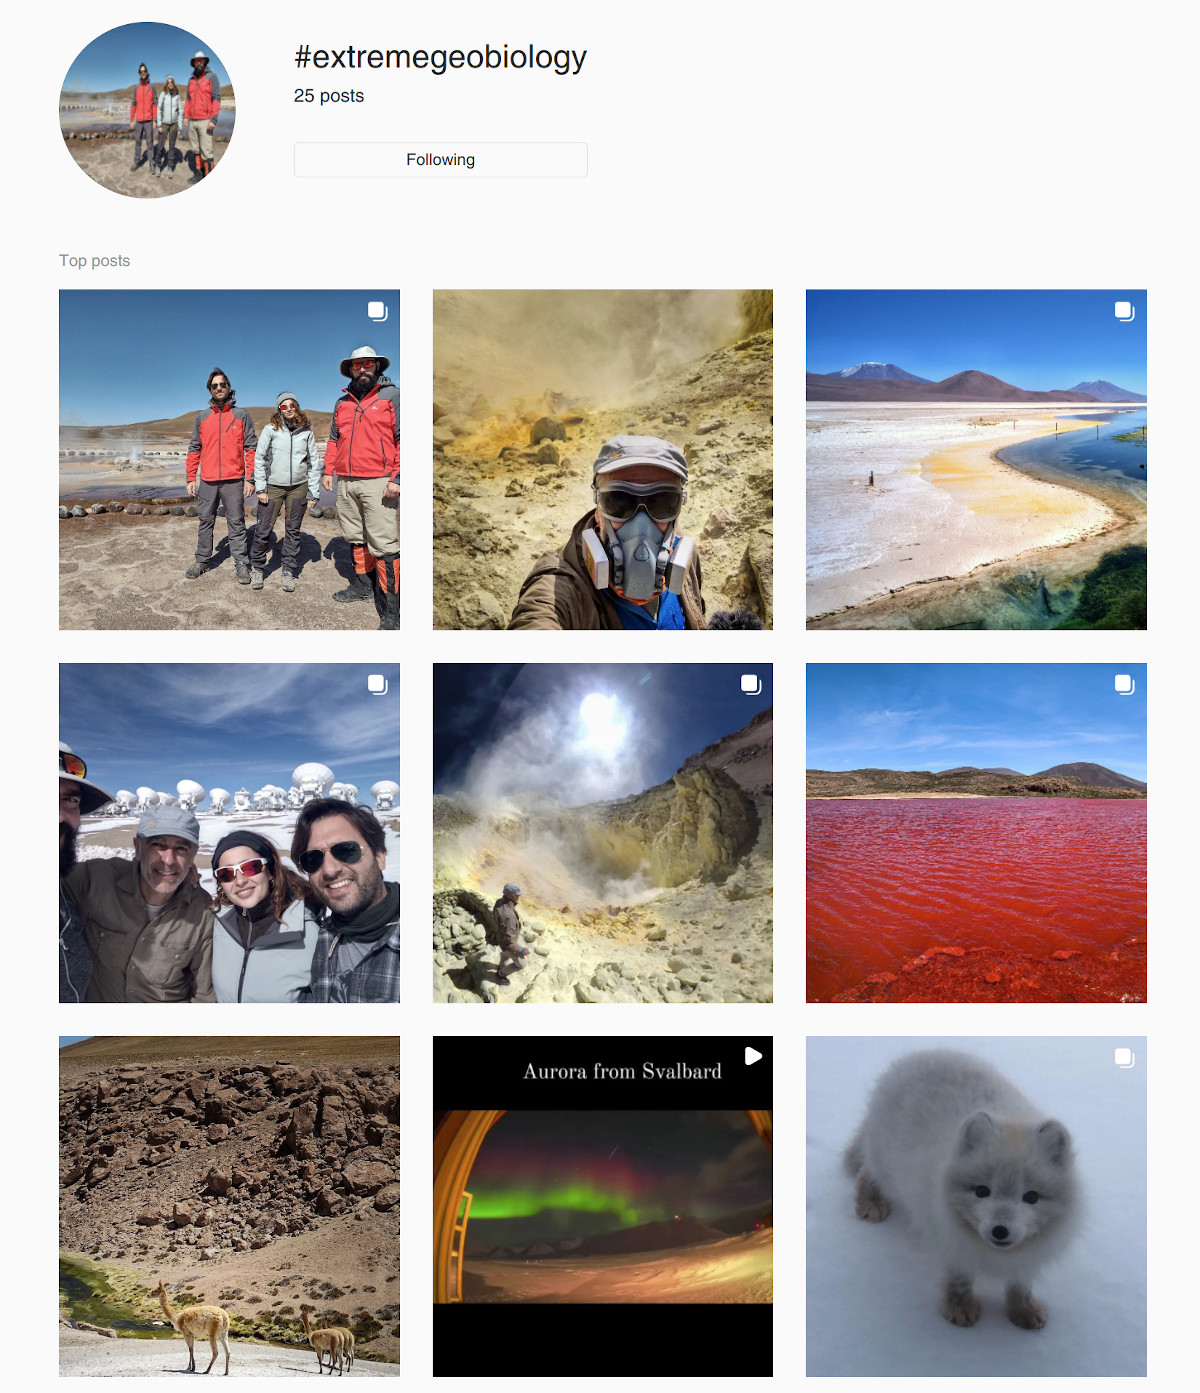 Link to the #ExtremeGeobiology tag on instagram